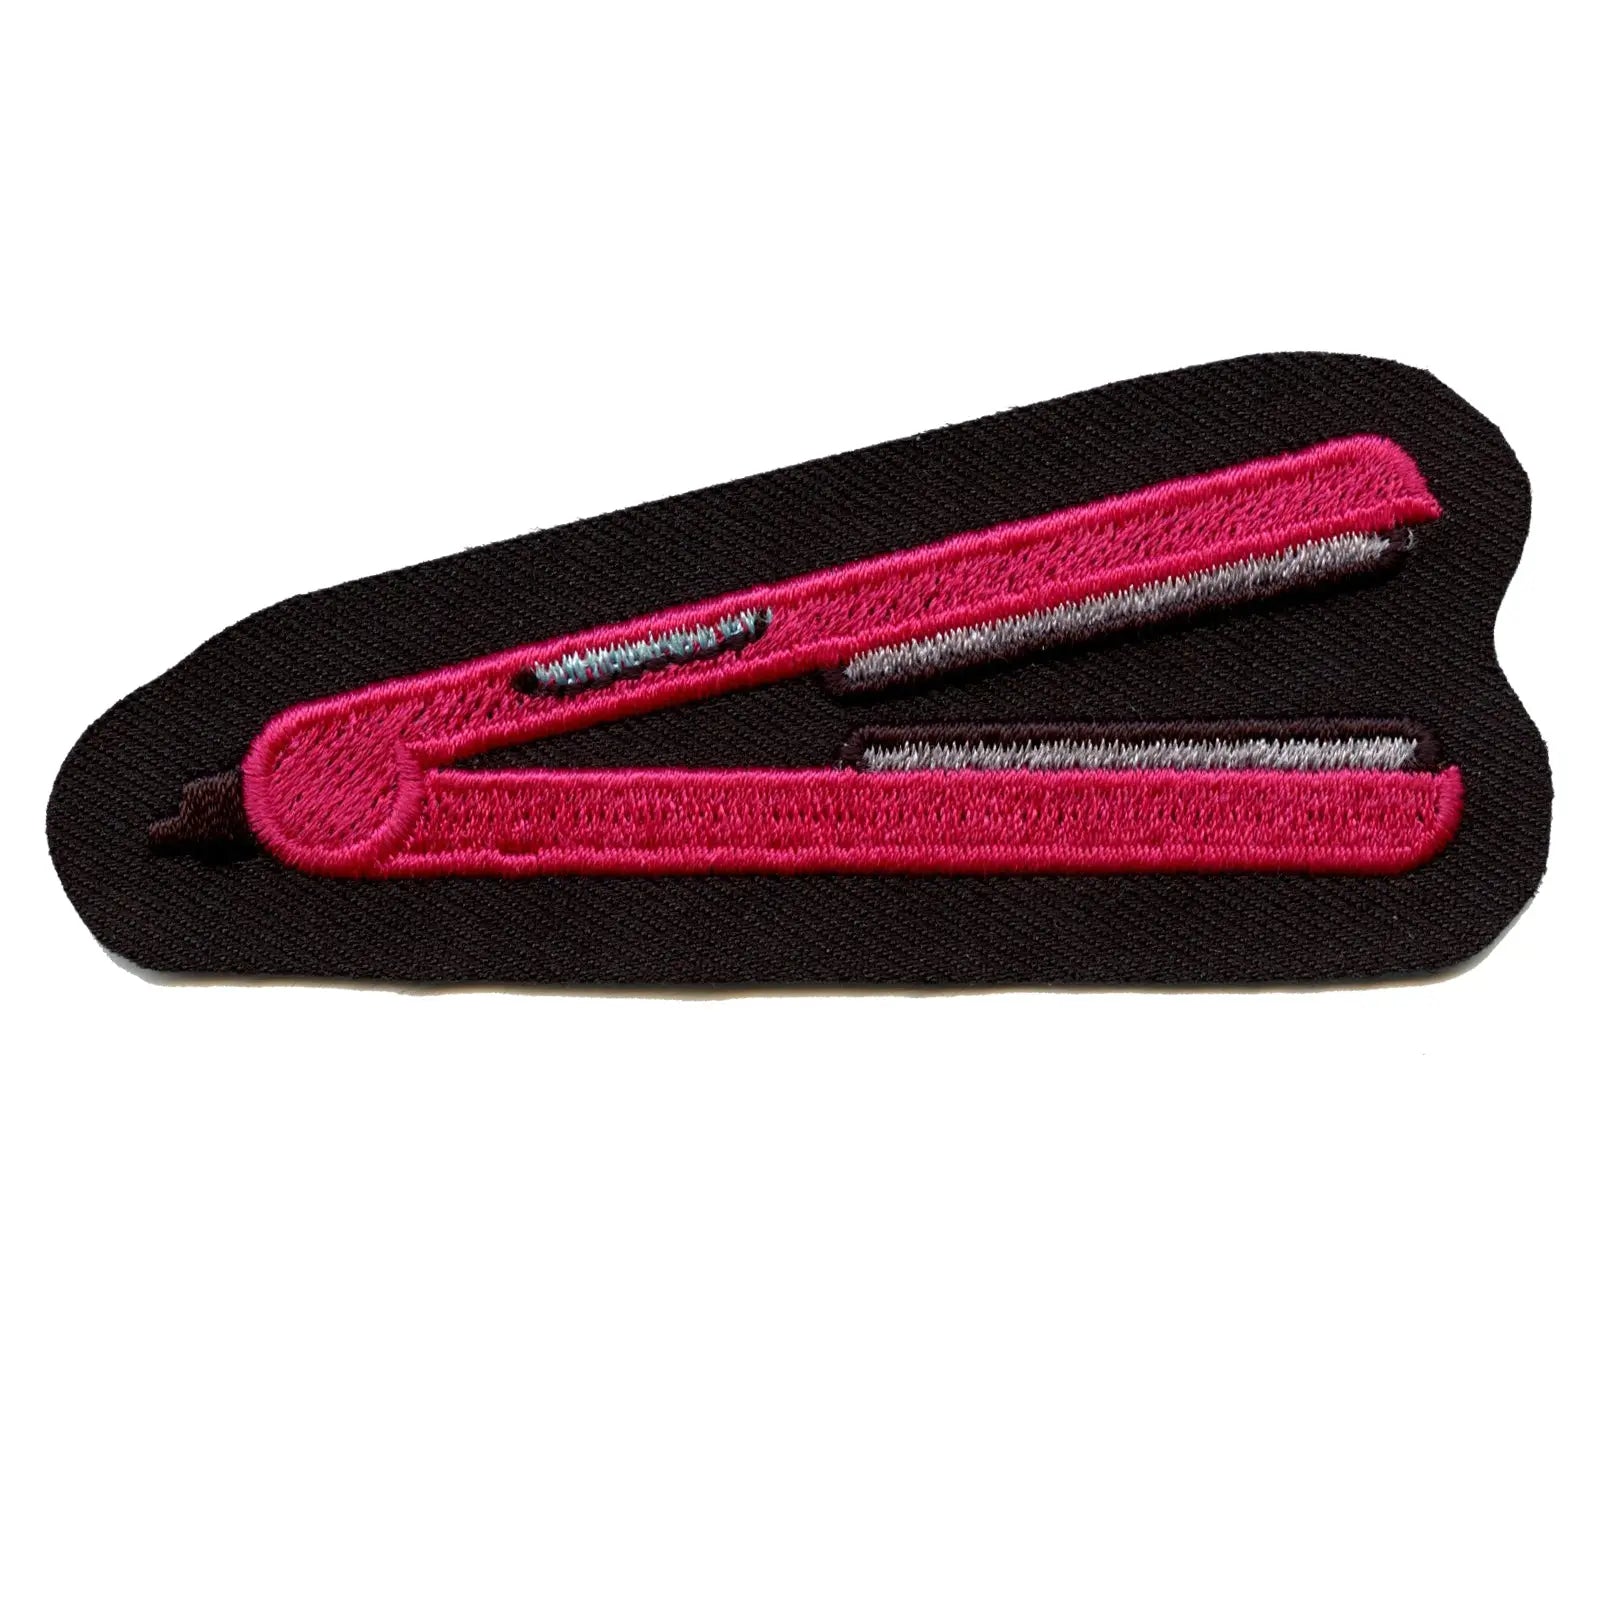 Flat Iron Hair Straightener Embroidered Iron On Patch 